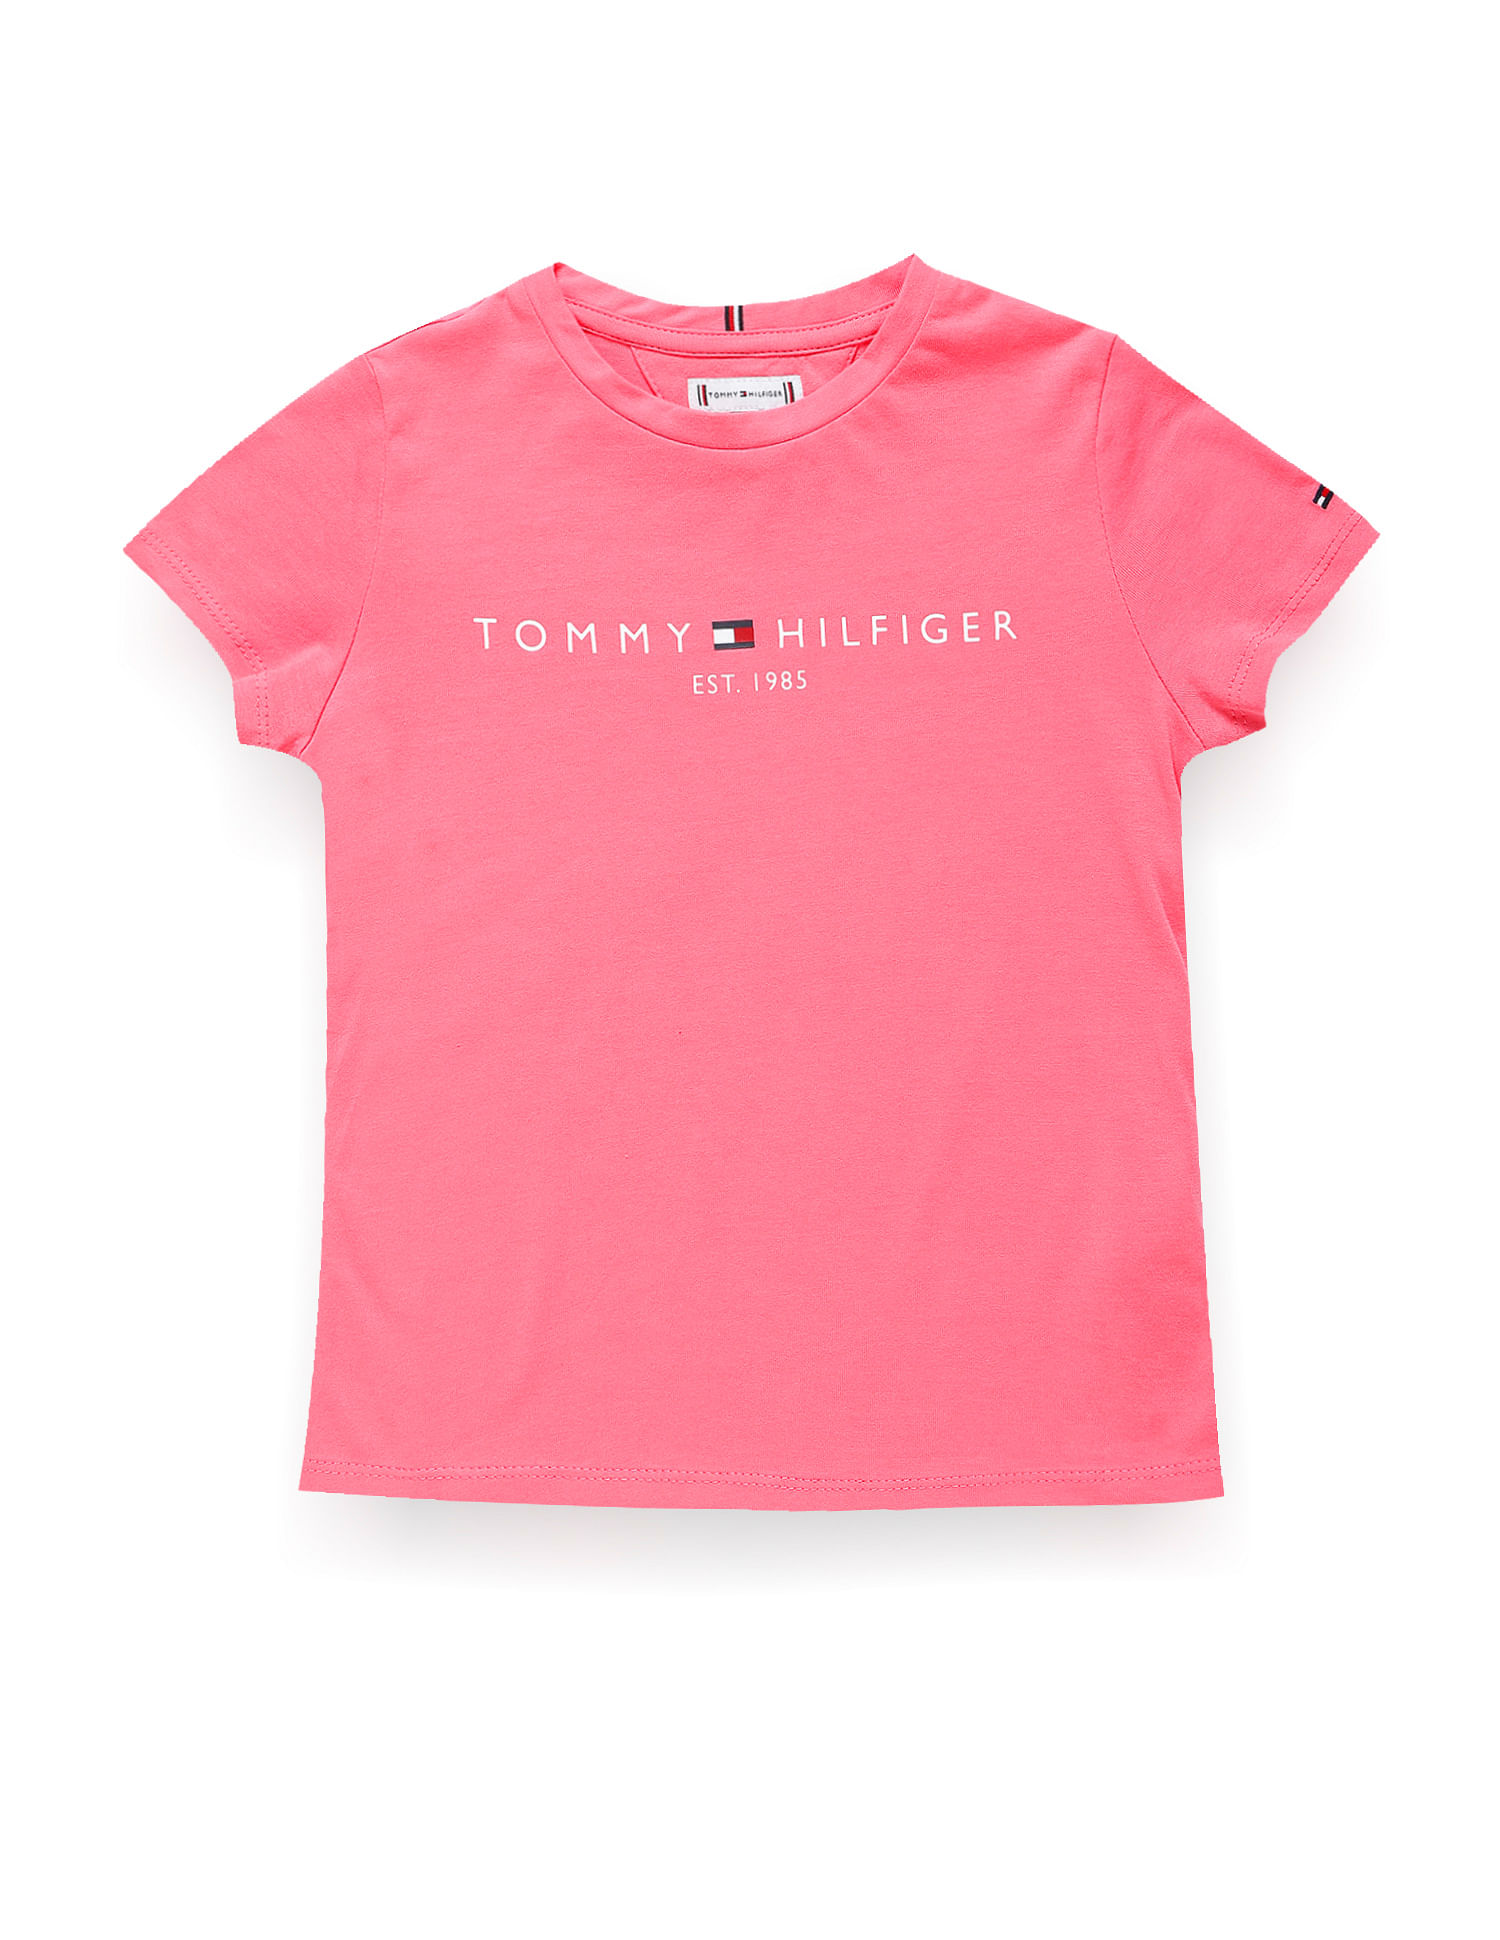 Buy Tommy Hilfiger Sustainable T-shirt Kids Essential Girls